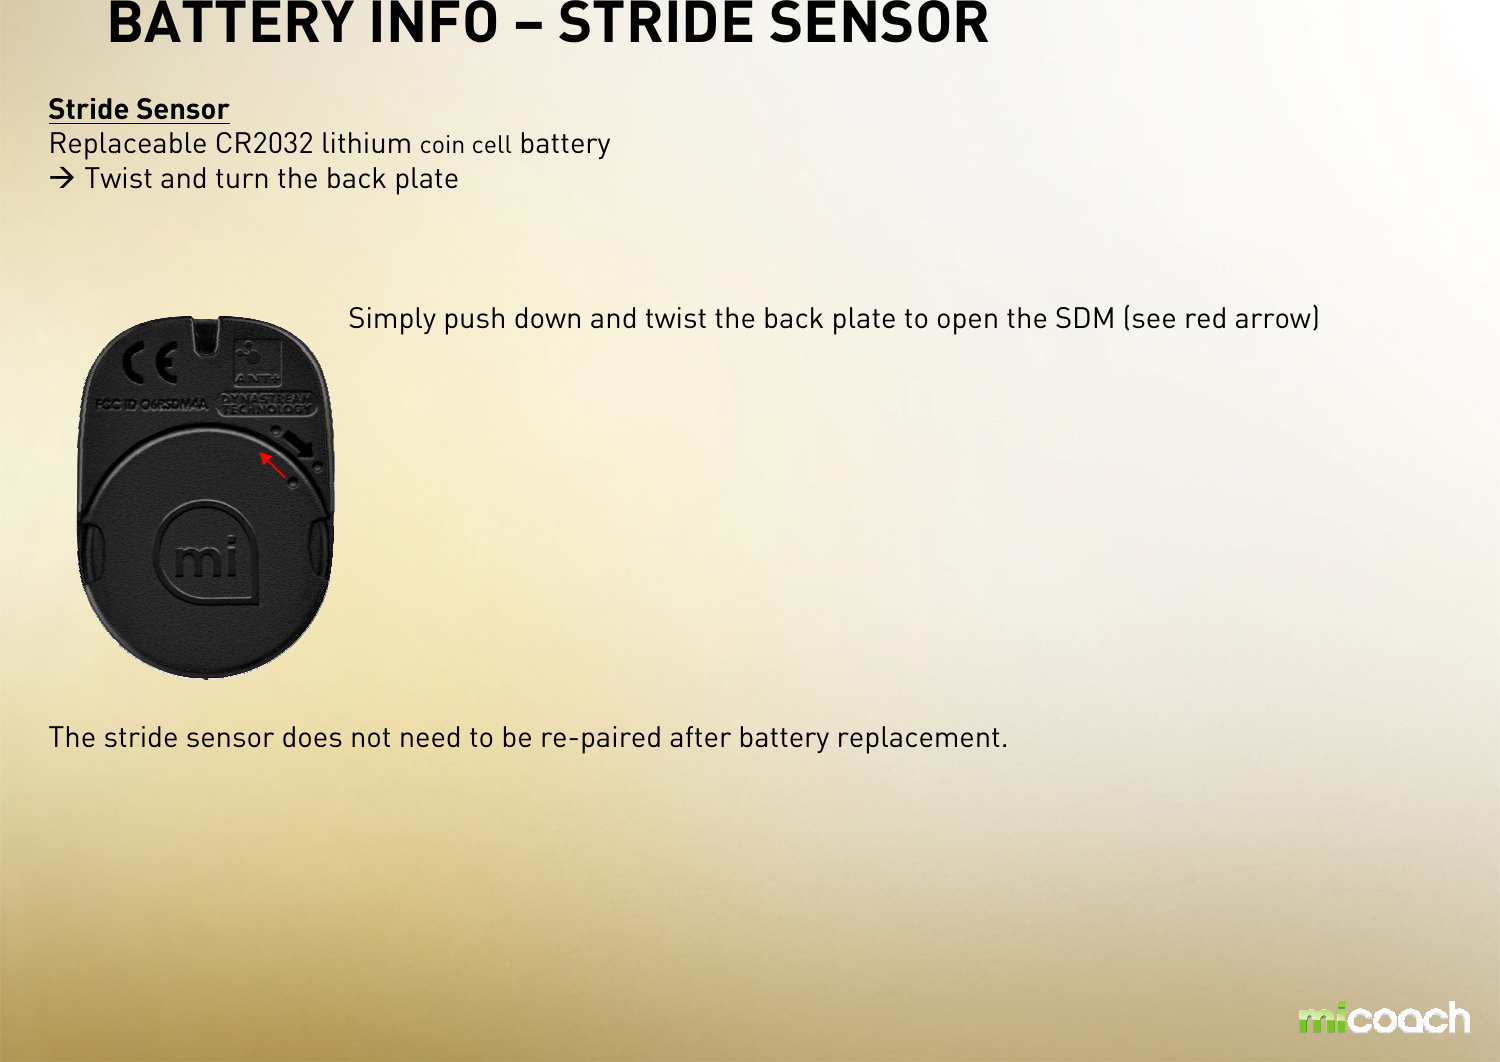 BATTERY INFO – STRIDE SENSORStride SensorReplaceable CR2032 lithium coin cellbatteryTwist and turn the back plate Simply push down and twist the back plate to open the SDM (see red arrow)The stride sensor does not need to be re-paired after battery replacement.